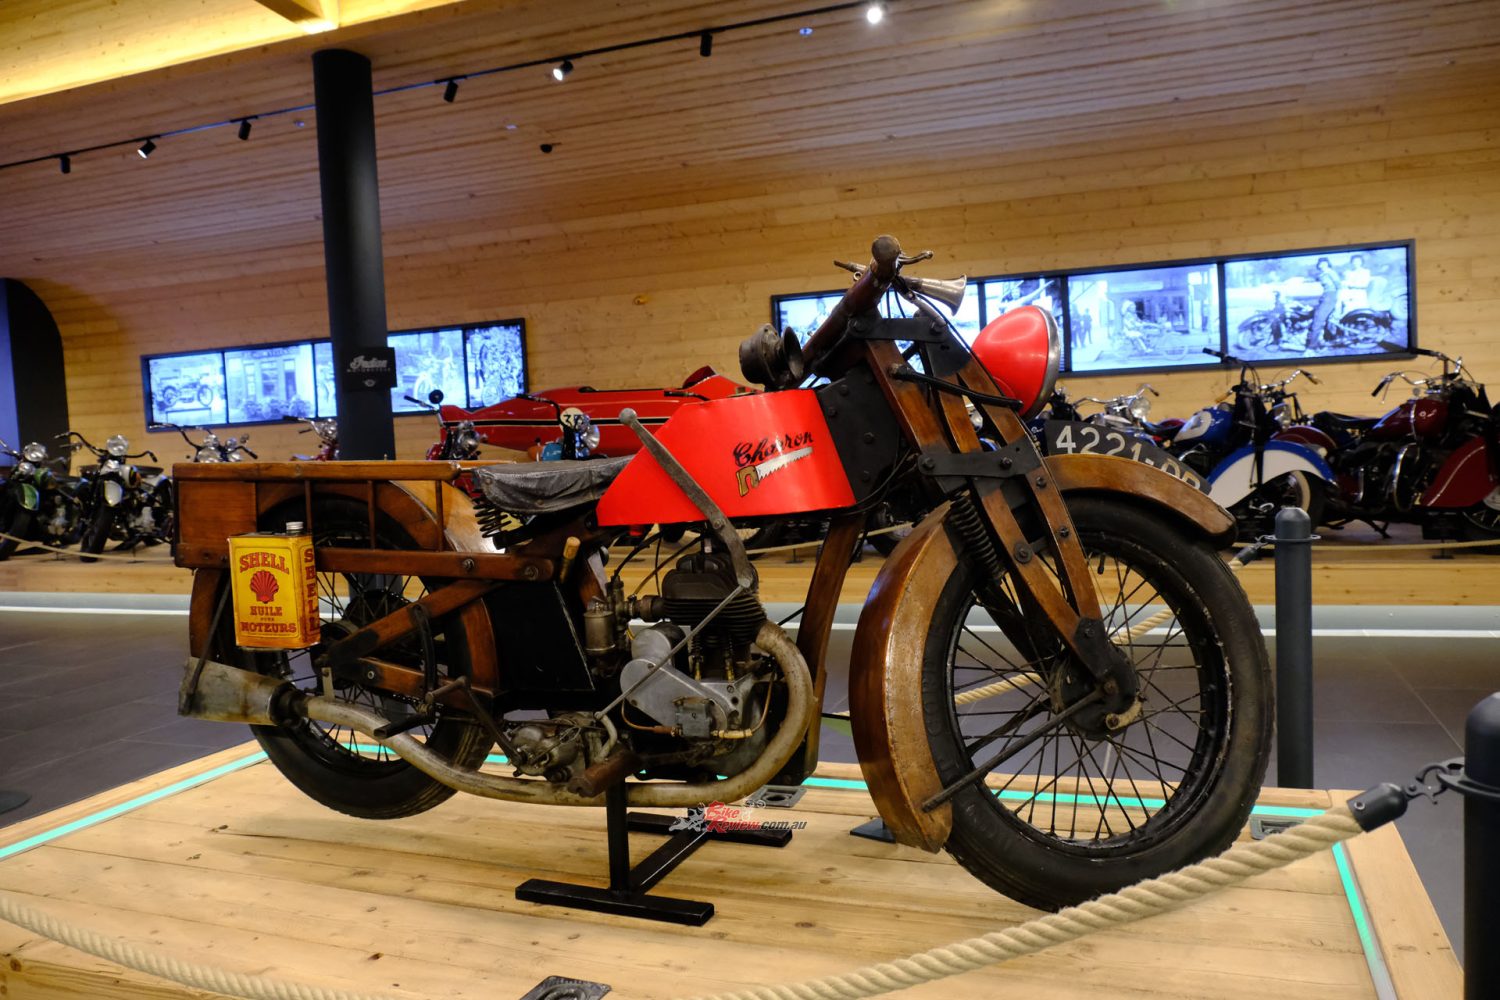 "What is certain is that the museum should be on your bucket list of you have the faintest interest in motorcycles, or indeed in race cars."